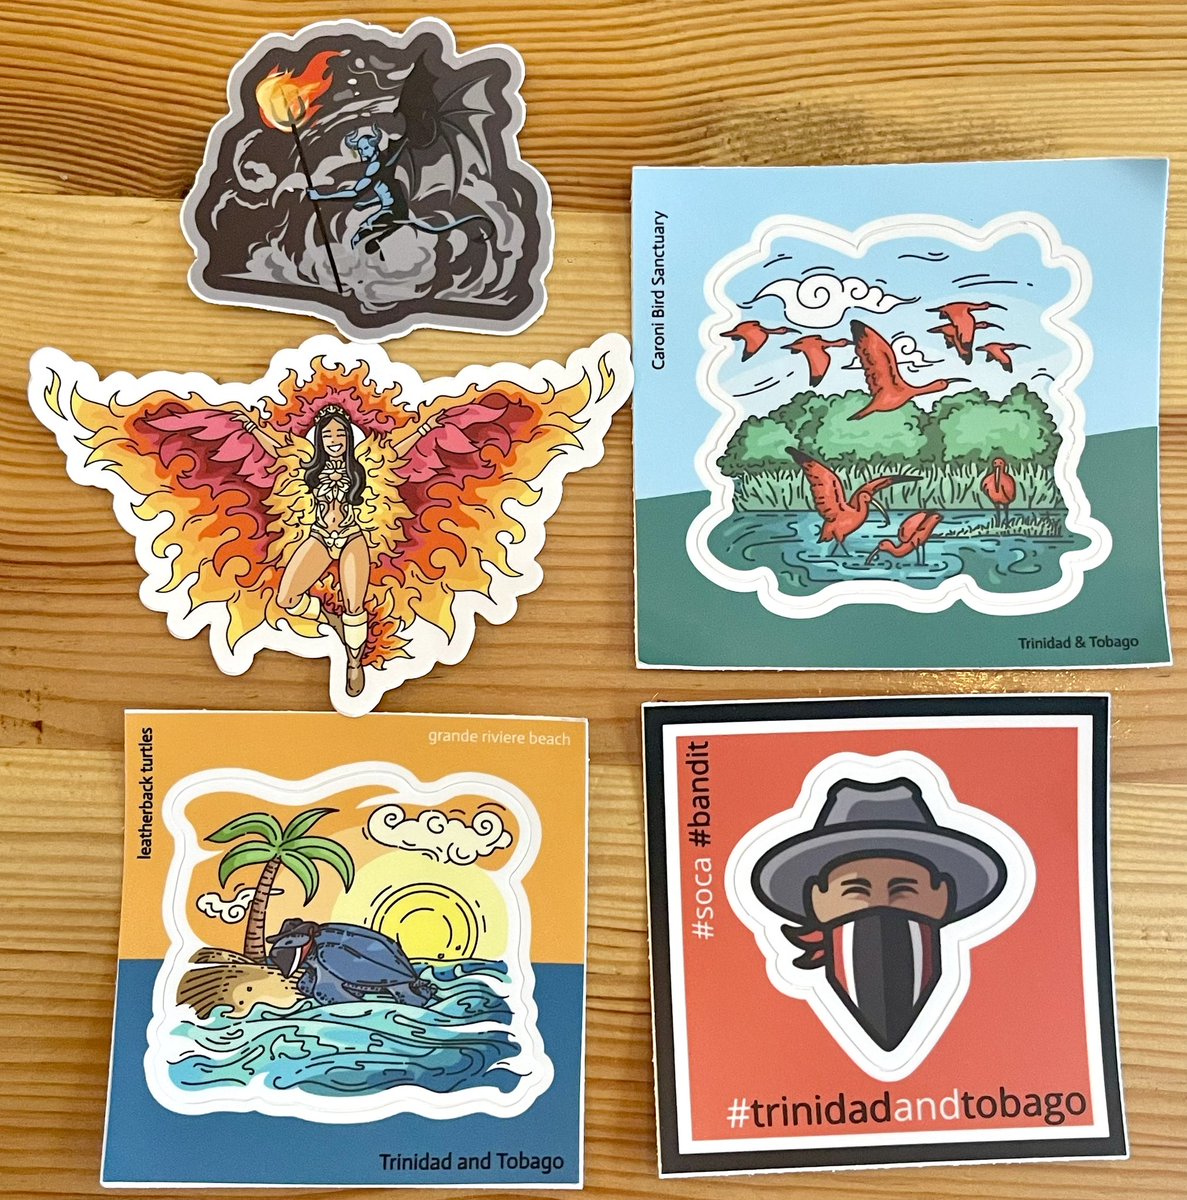 Love these stickers of our local 🇹🇹 stuffs ❤️ from Canboulay Creations. Find them on their Etsy store - etsy.com/shop/Canboulay… #TrinidadAndTobago 🇹🇹 #Stickers #WeCulture